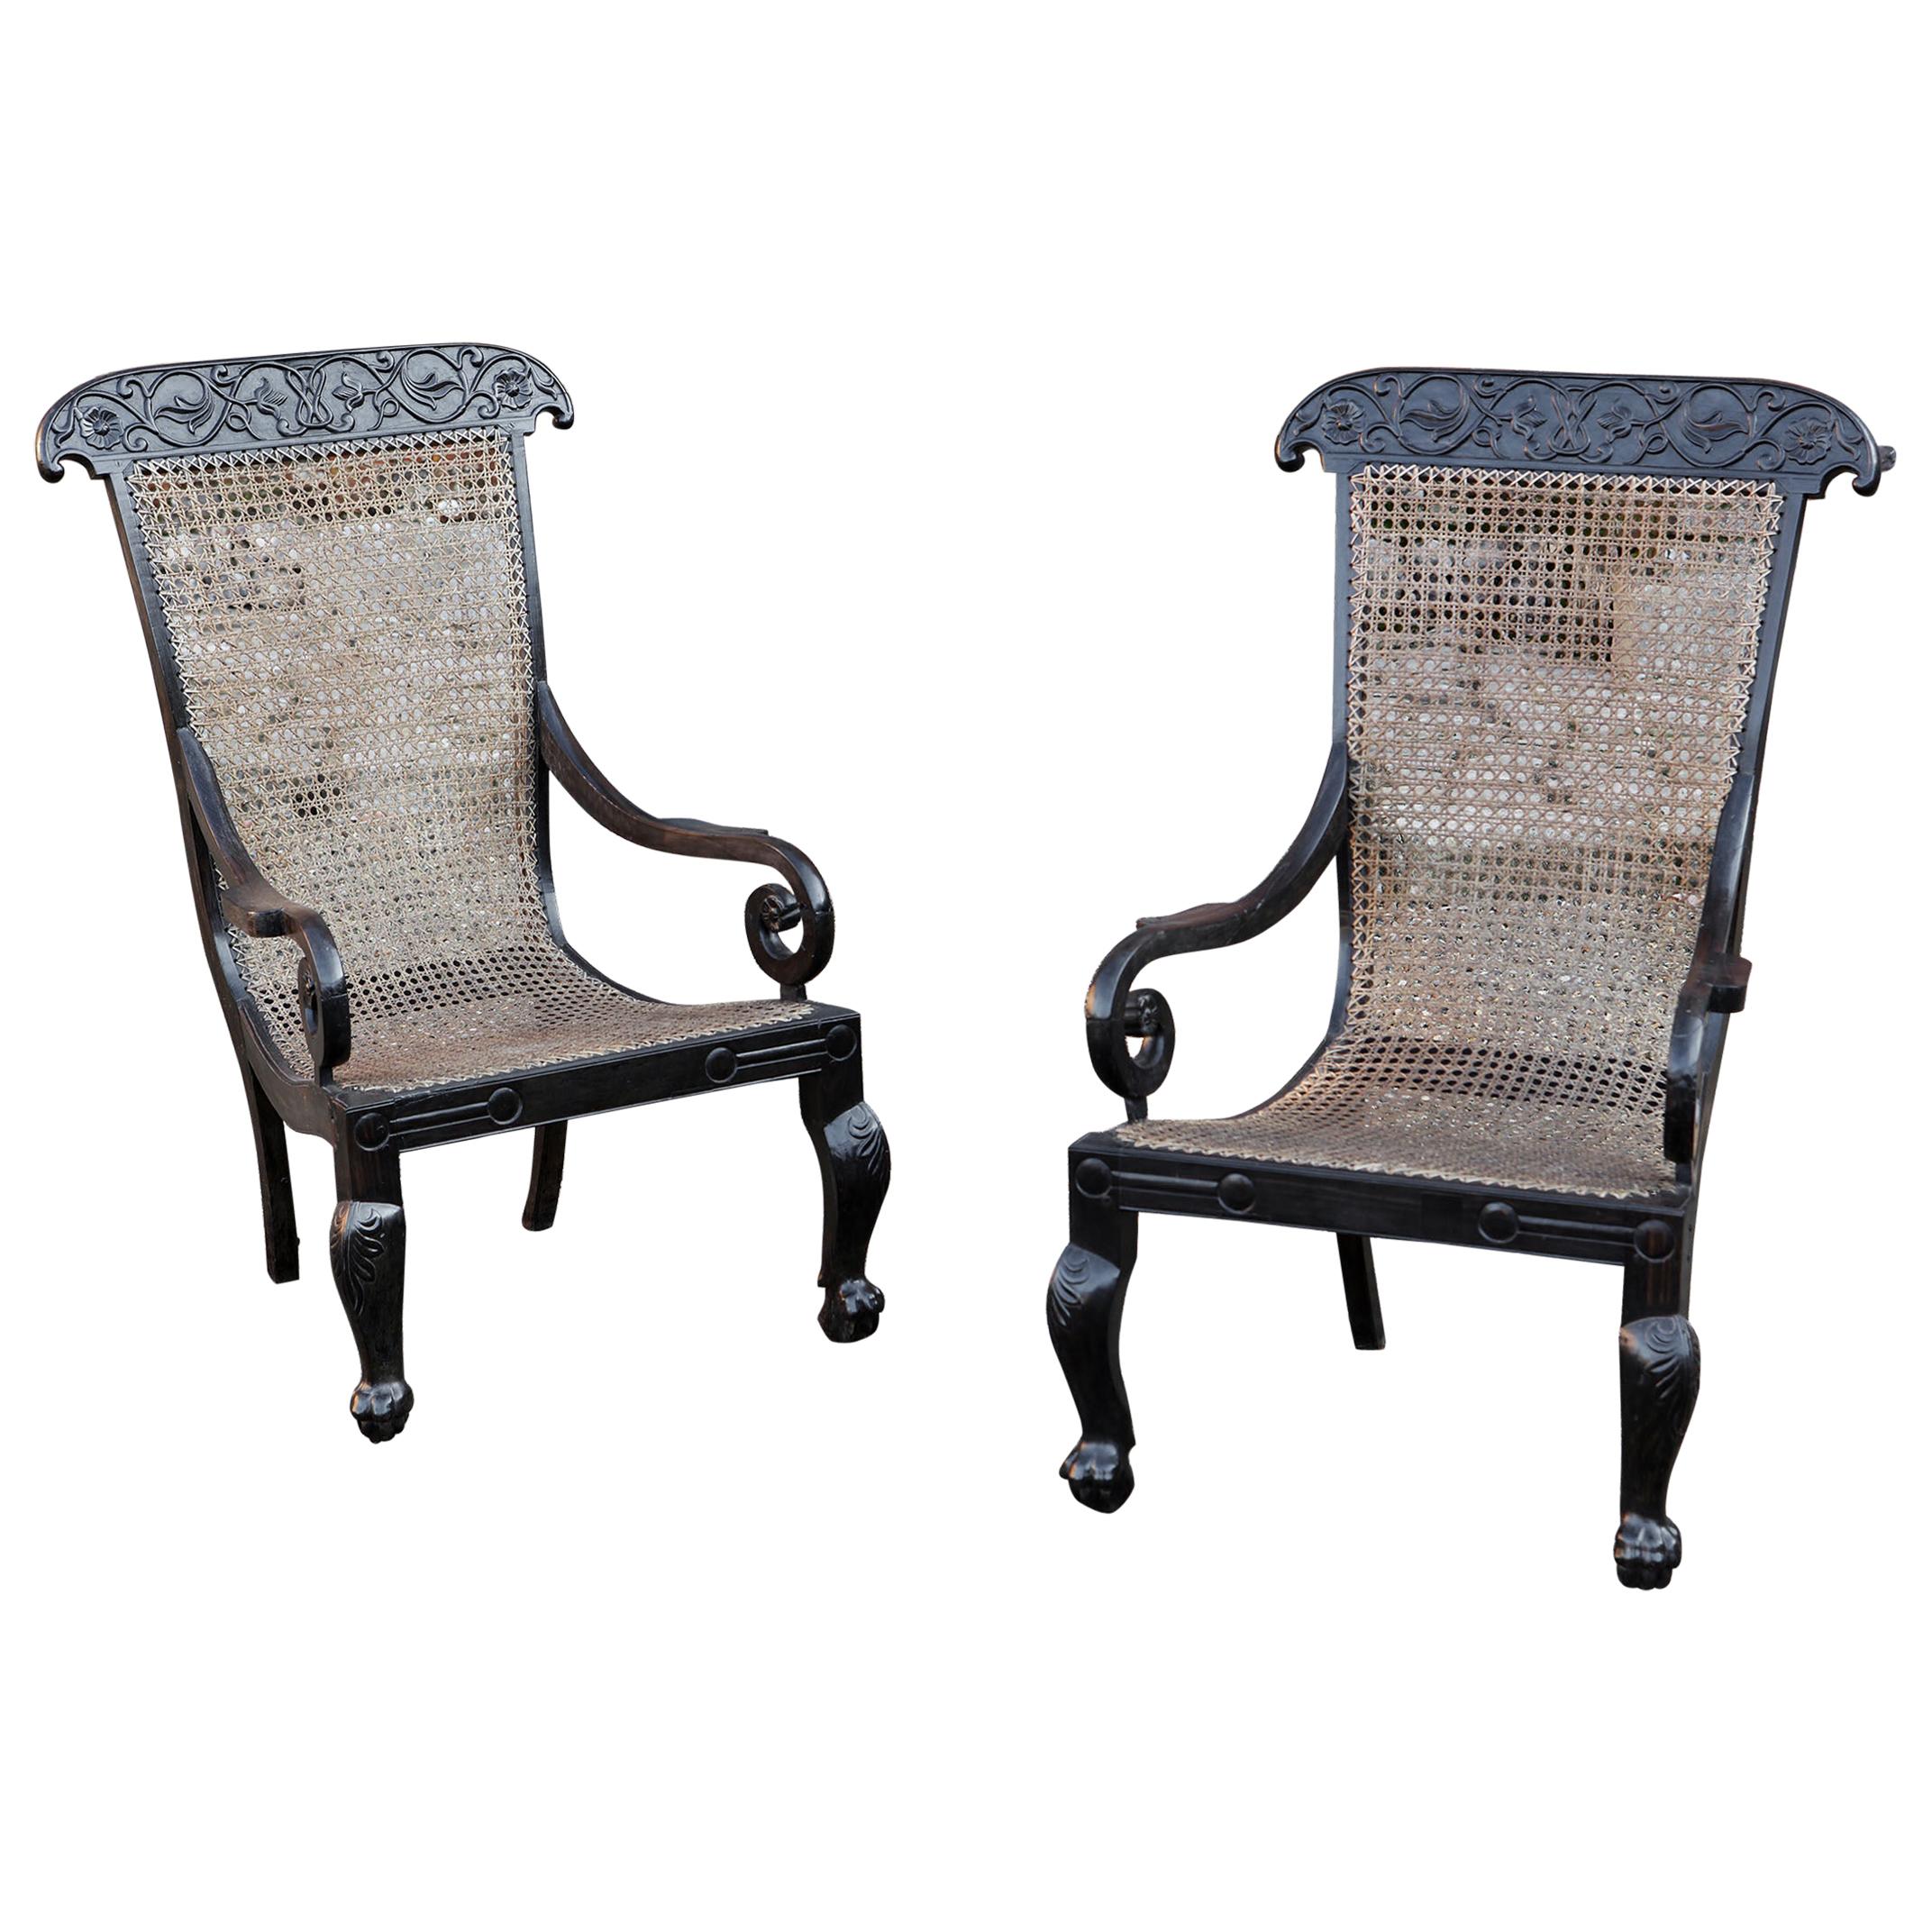 Pair of 19th Century Anglo-Indian Solid Ebony Caned Armchairs